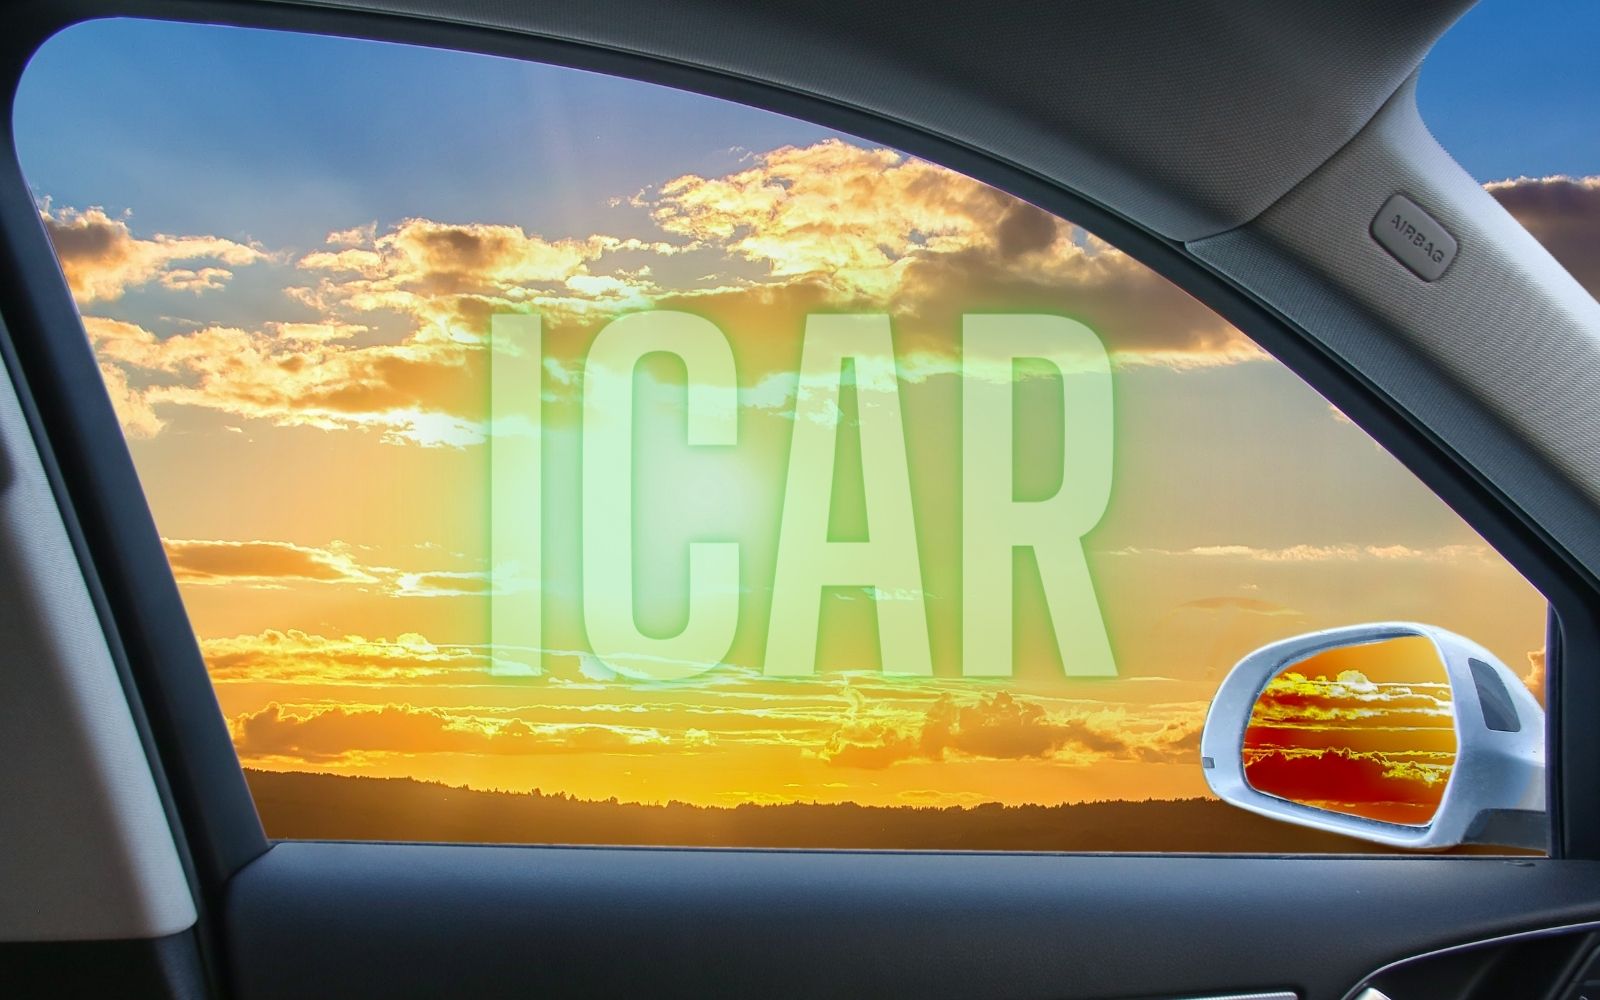 Patent filings shine the light on what the electric Apple iCar could be